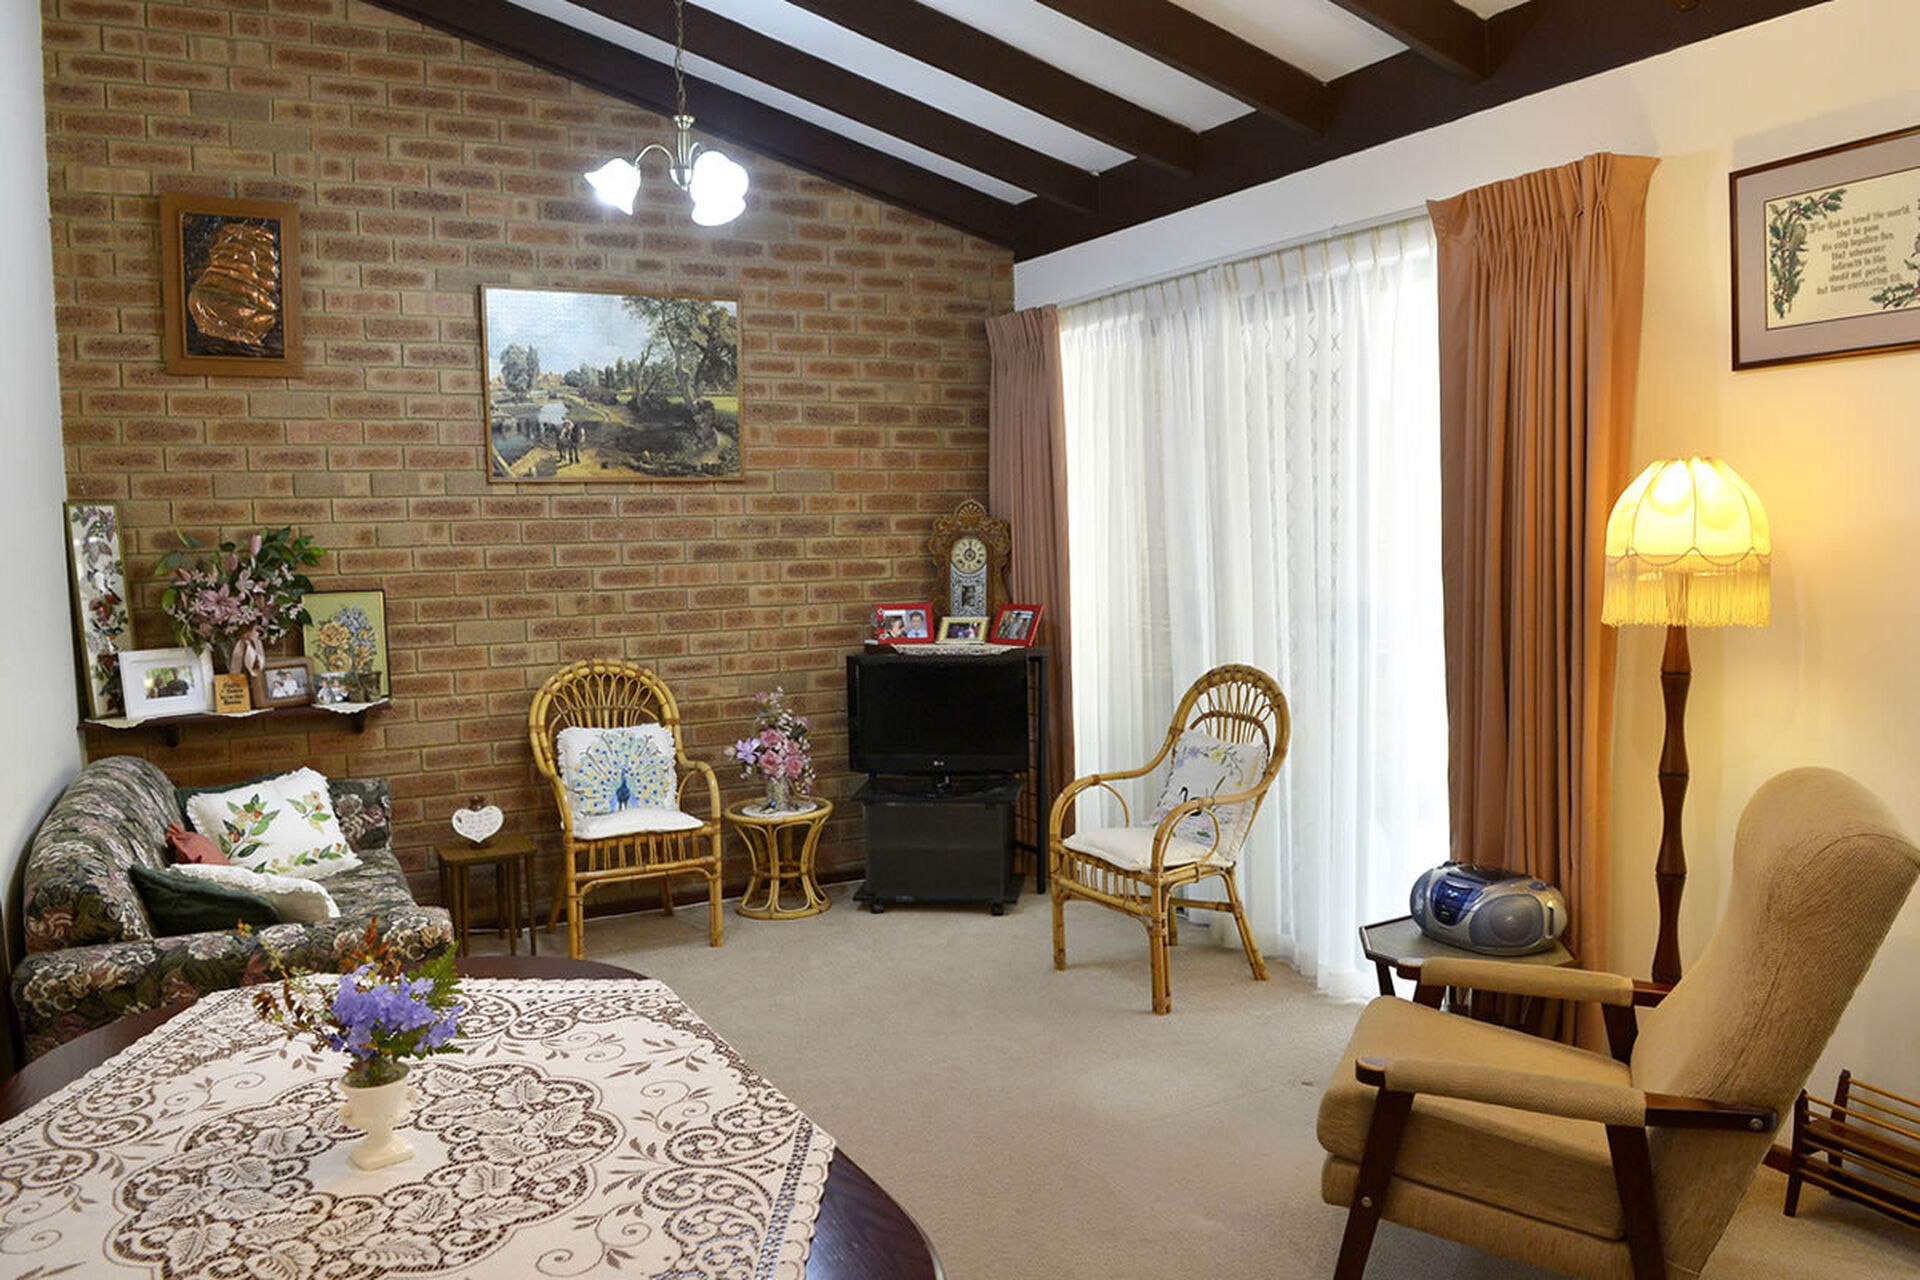 spacious interior of one of the retirement villas available at the over 55s baptistcare yallambee retirement village in mundaring wa